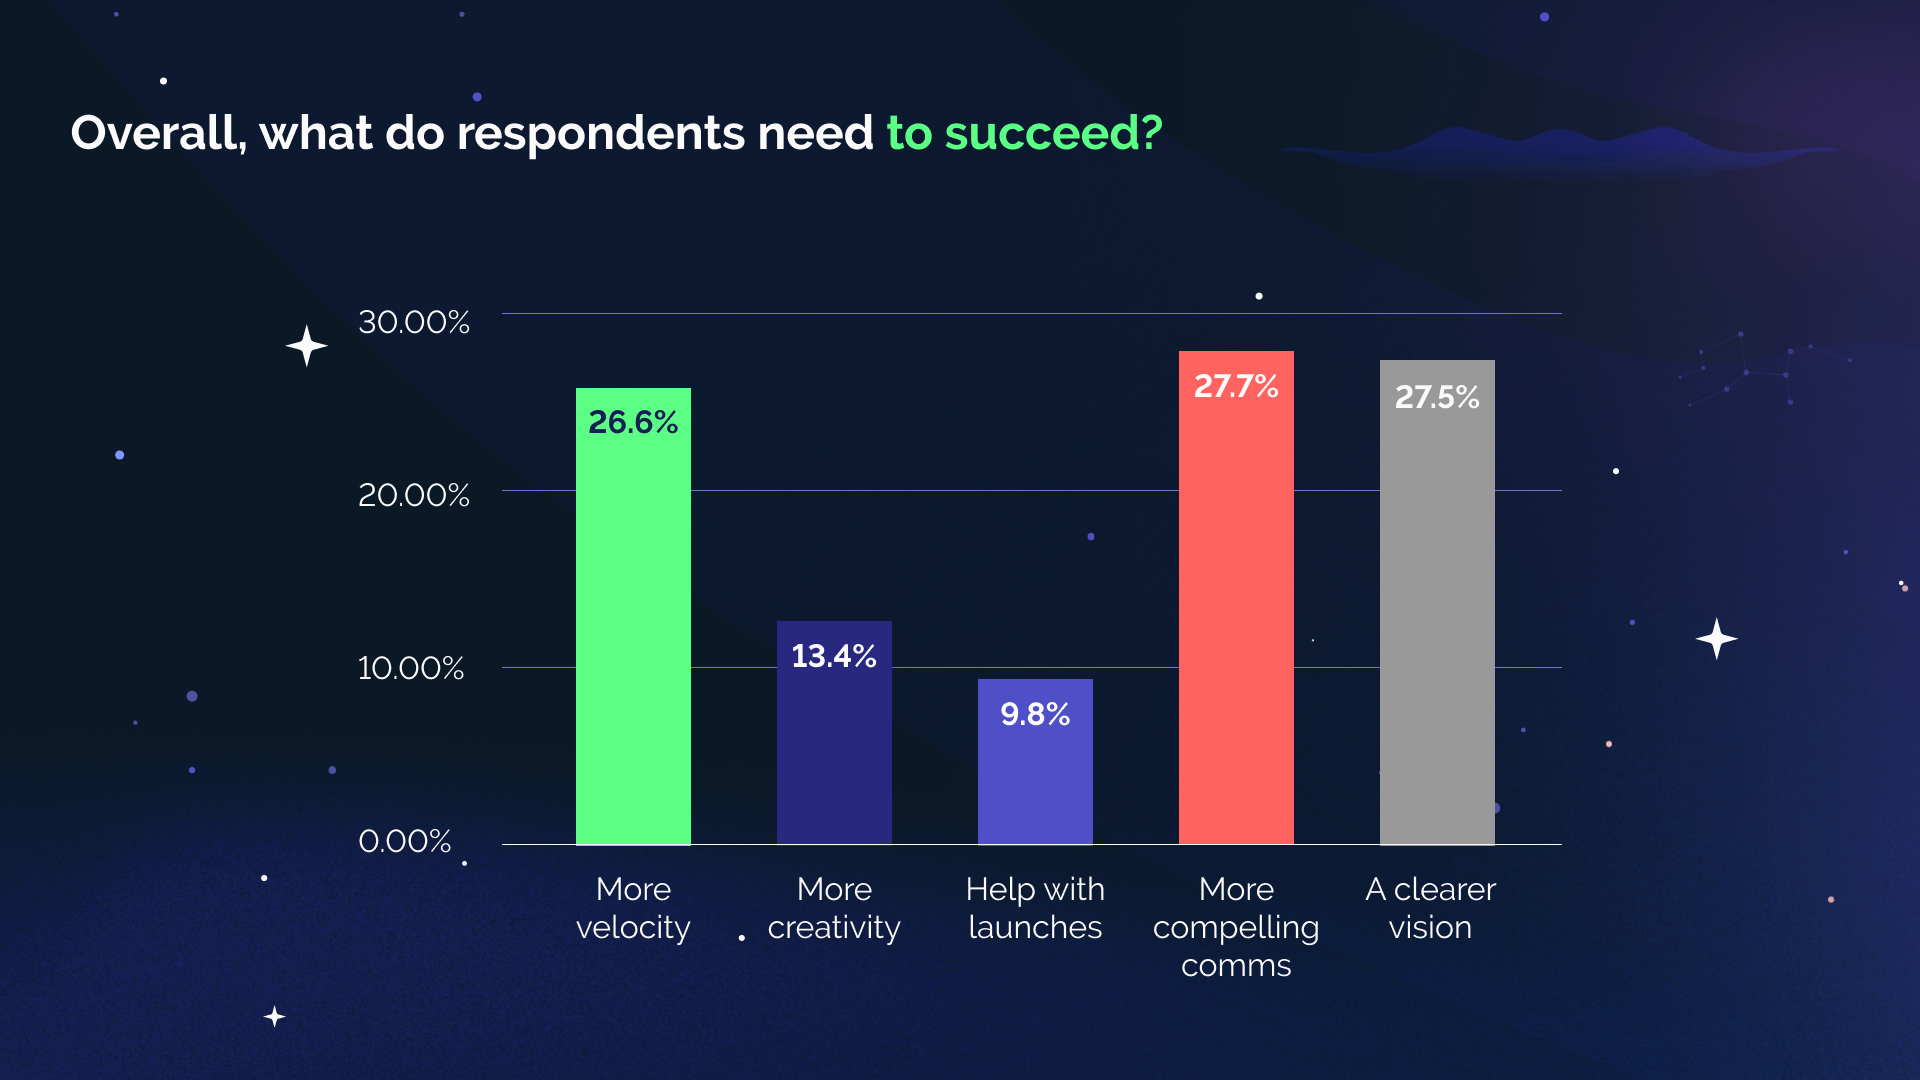 Overall, what do respondents need to succeed?